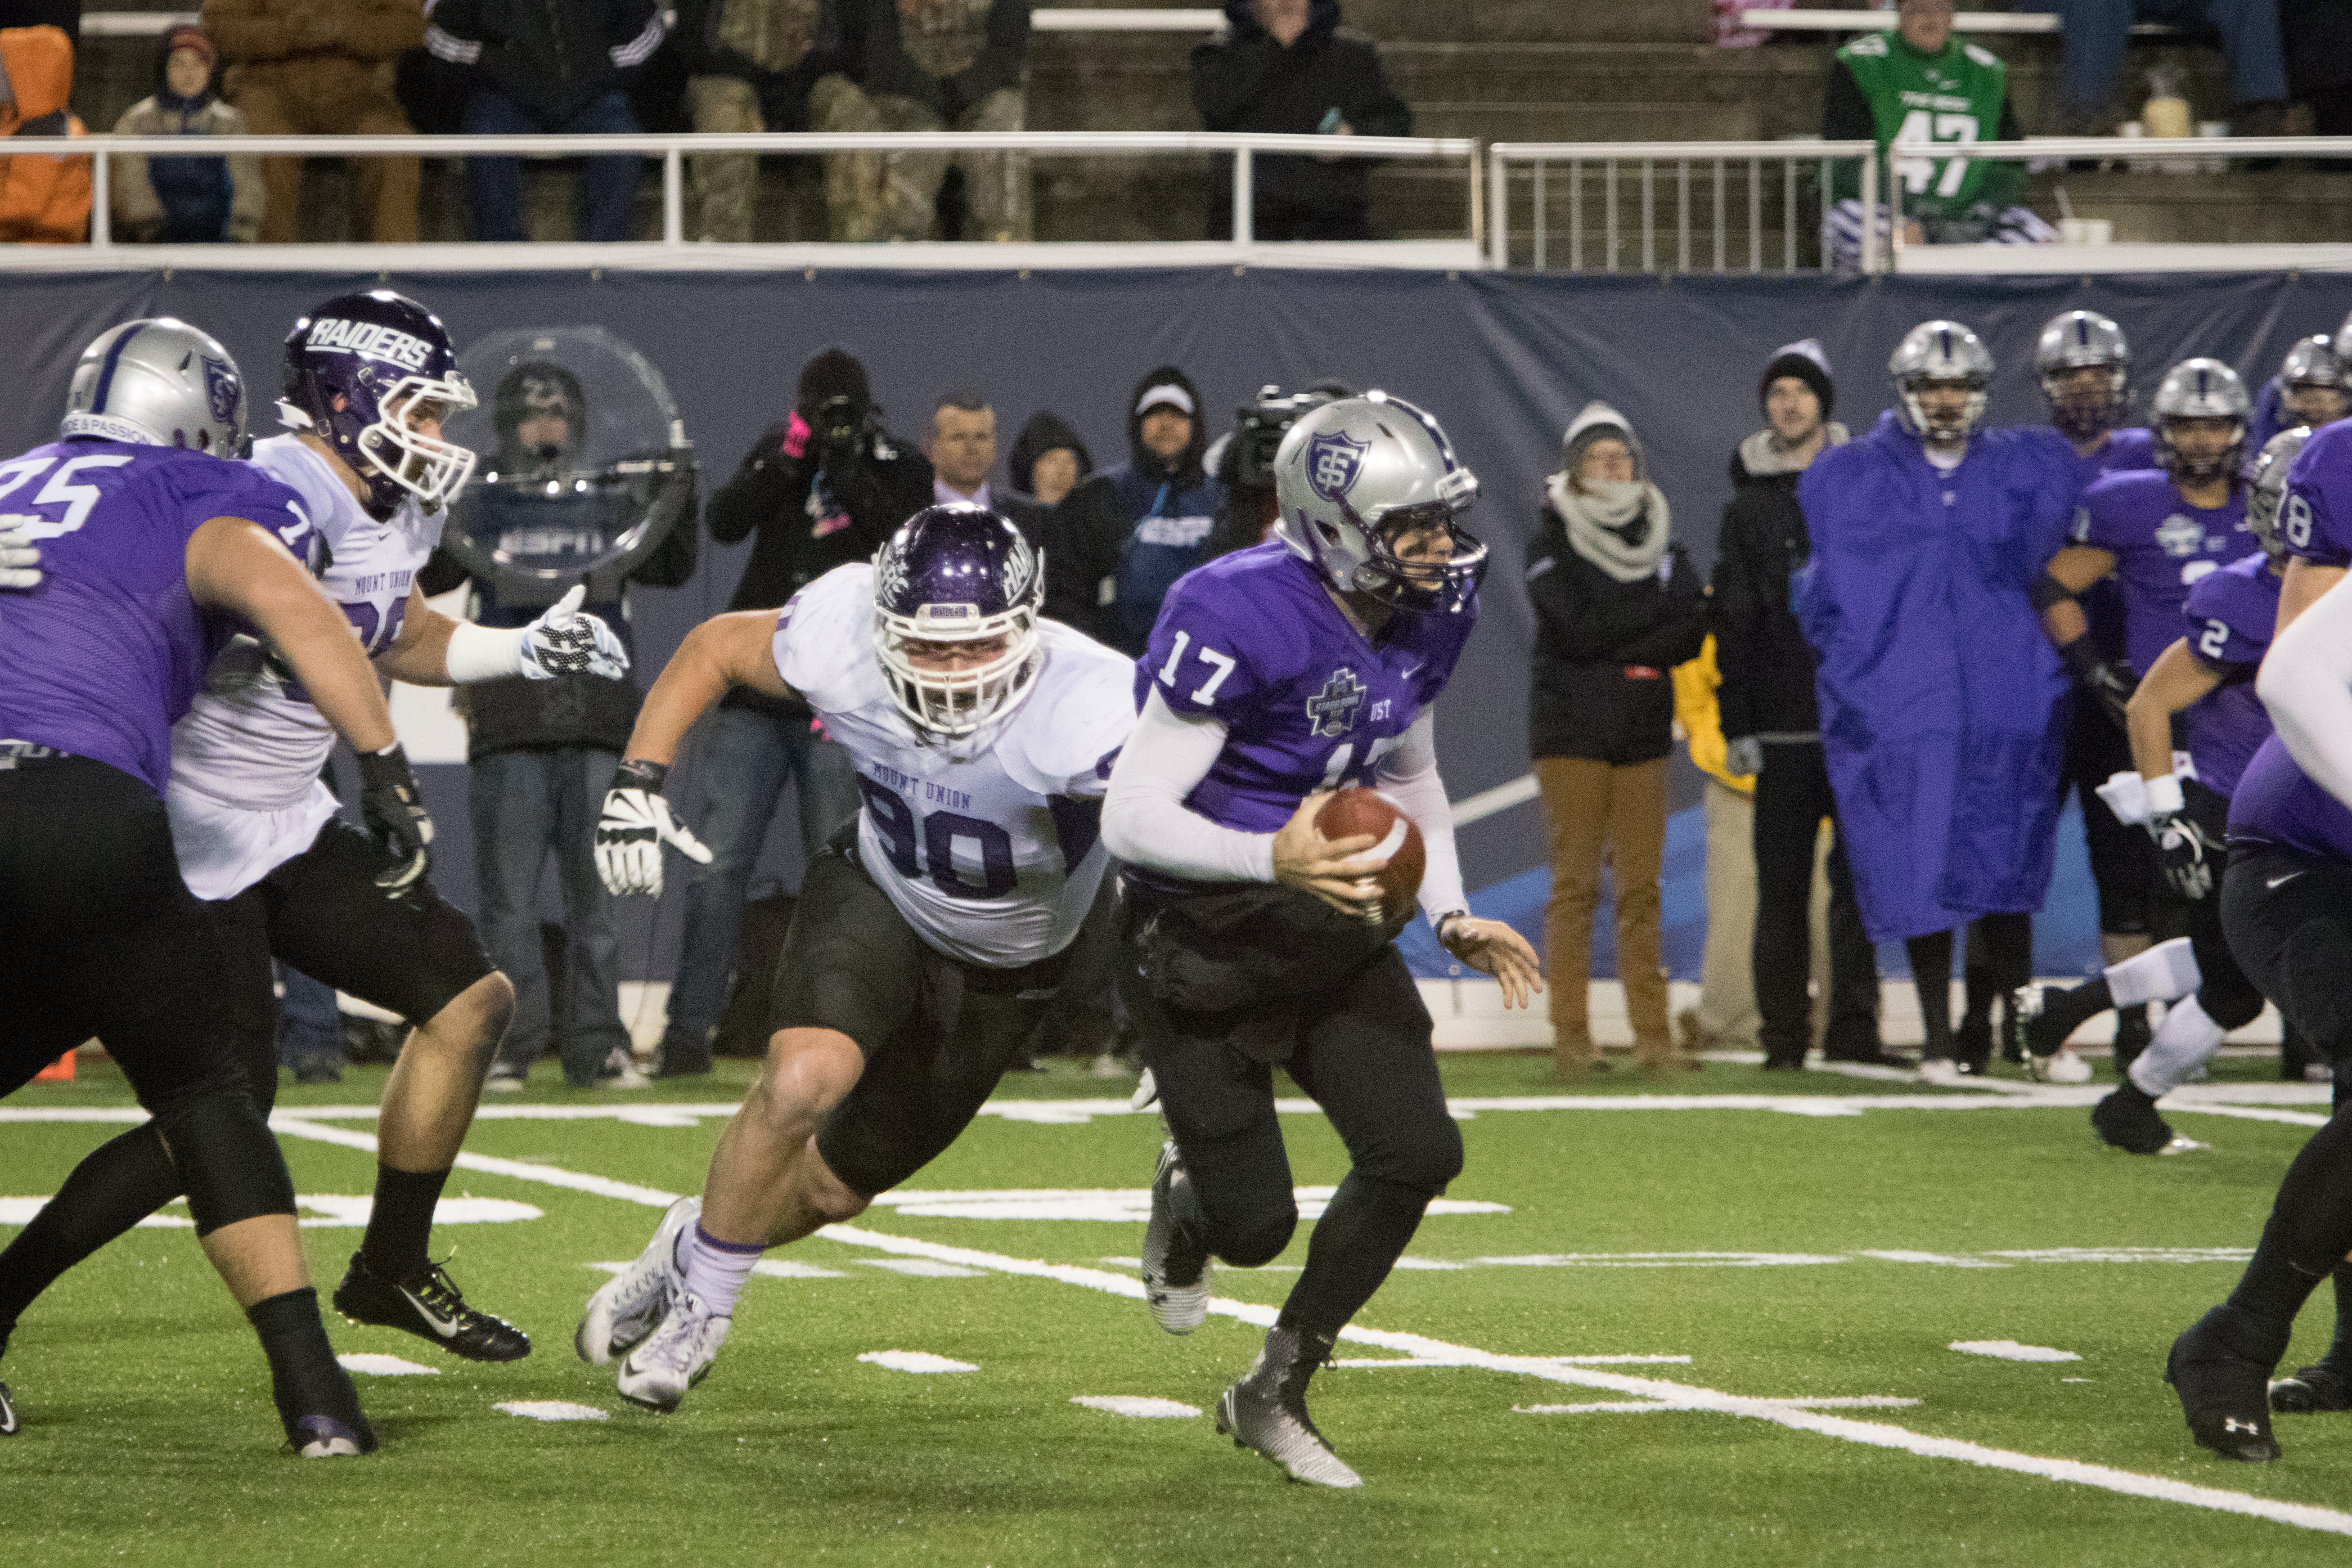 Stagg Bowl